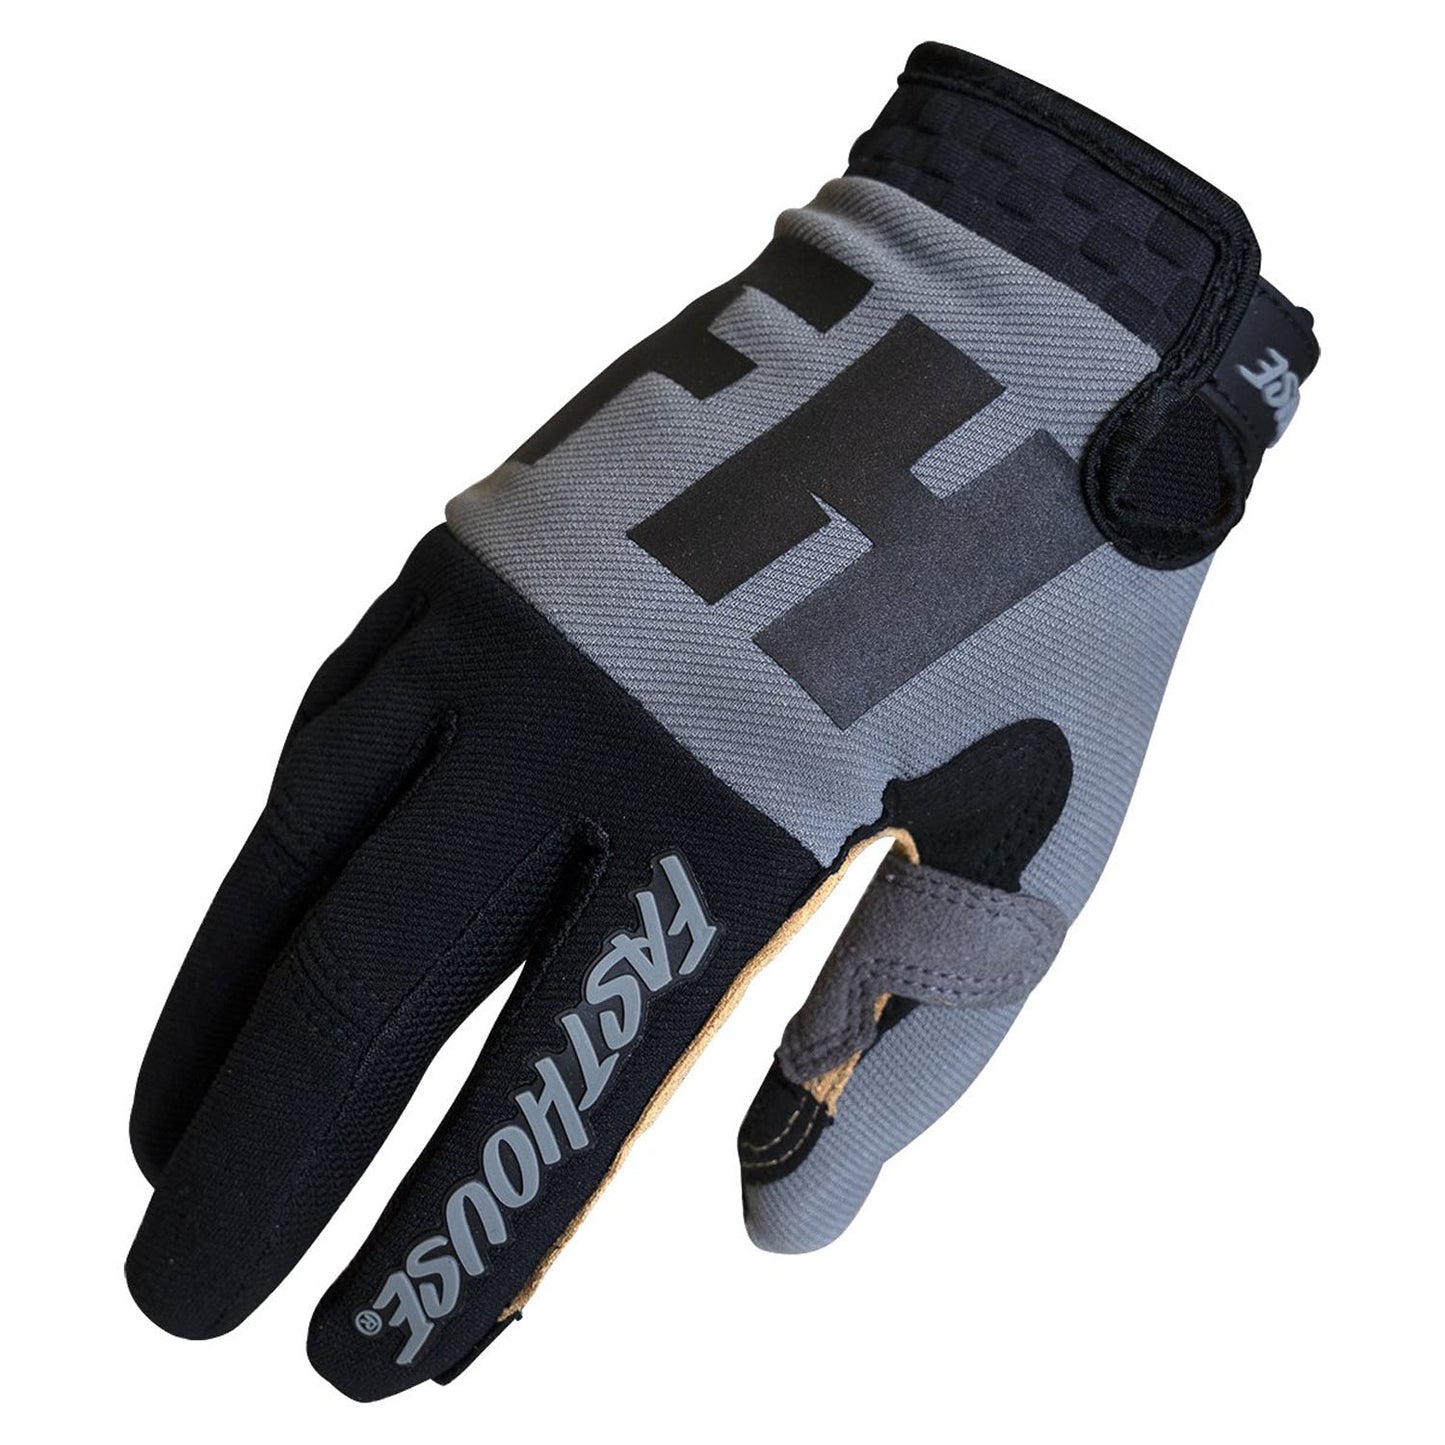 Fasthouse Speed Style Glove Remnant - Gray Black S Bike Gloves